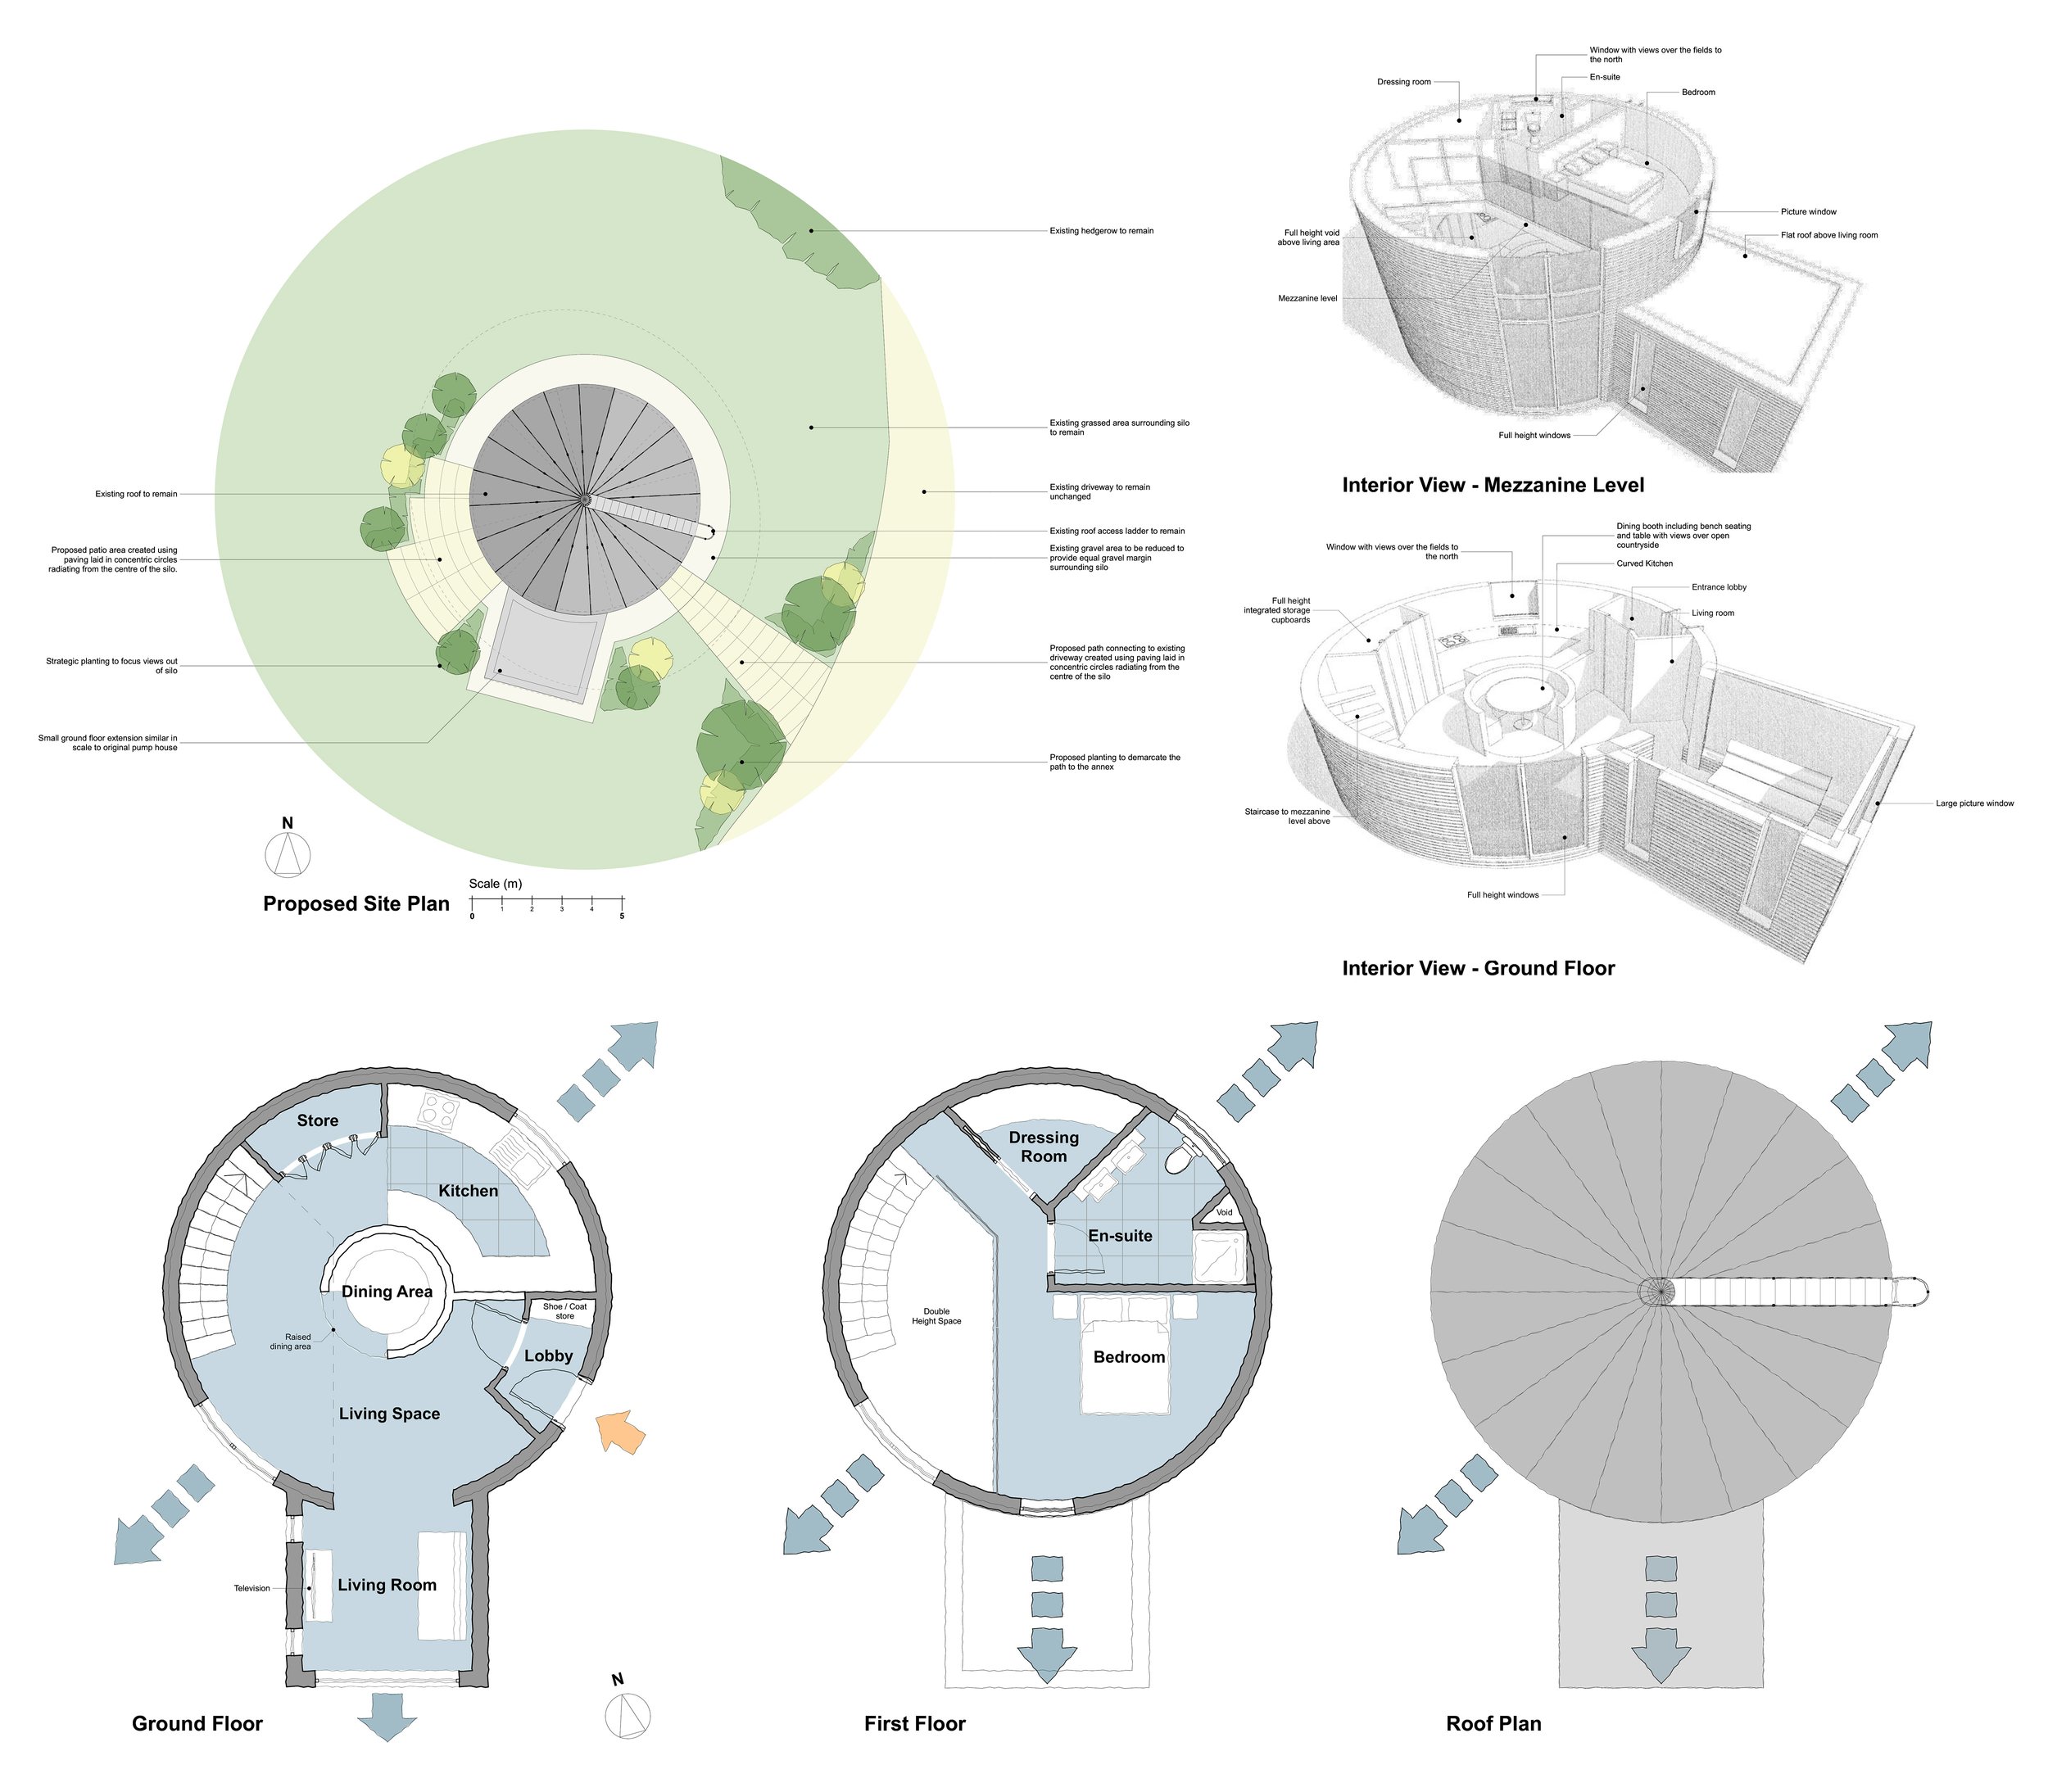 Planning - Silo conversion plans and site plan.jpg